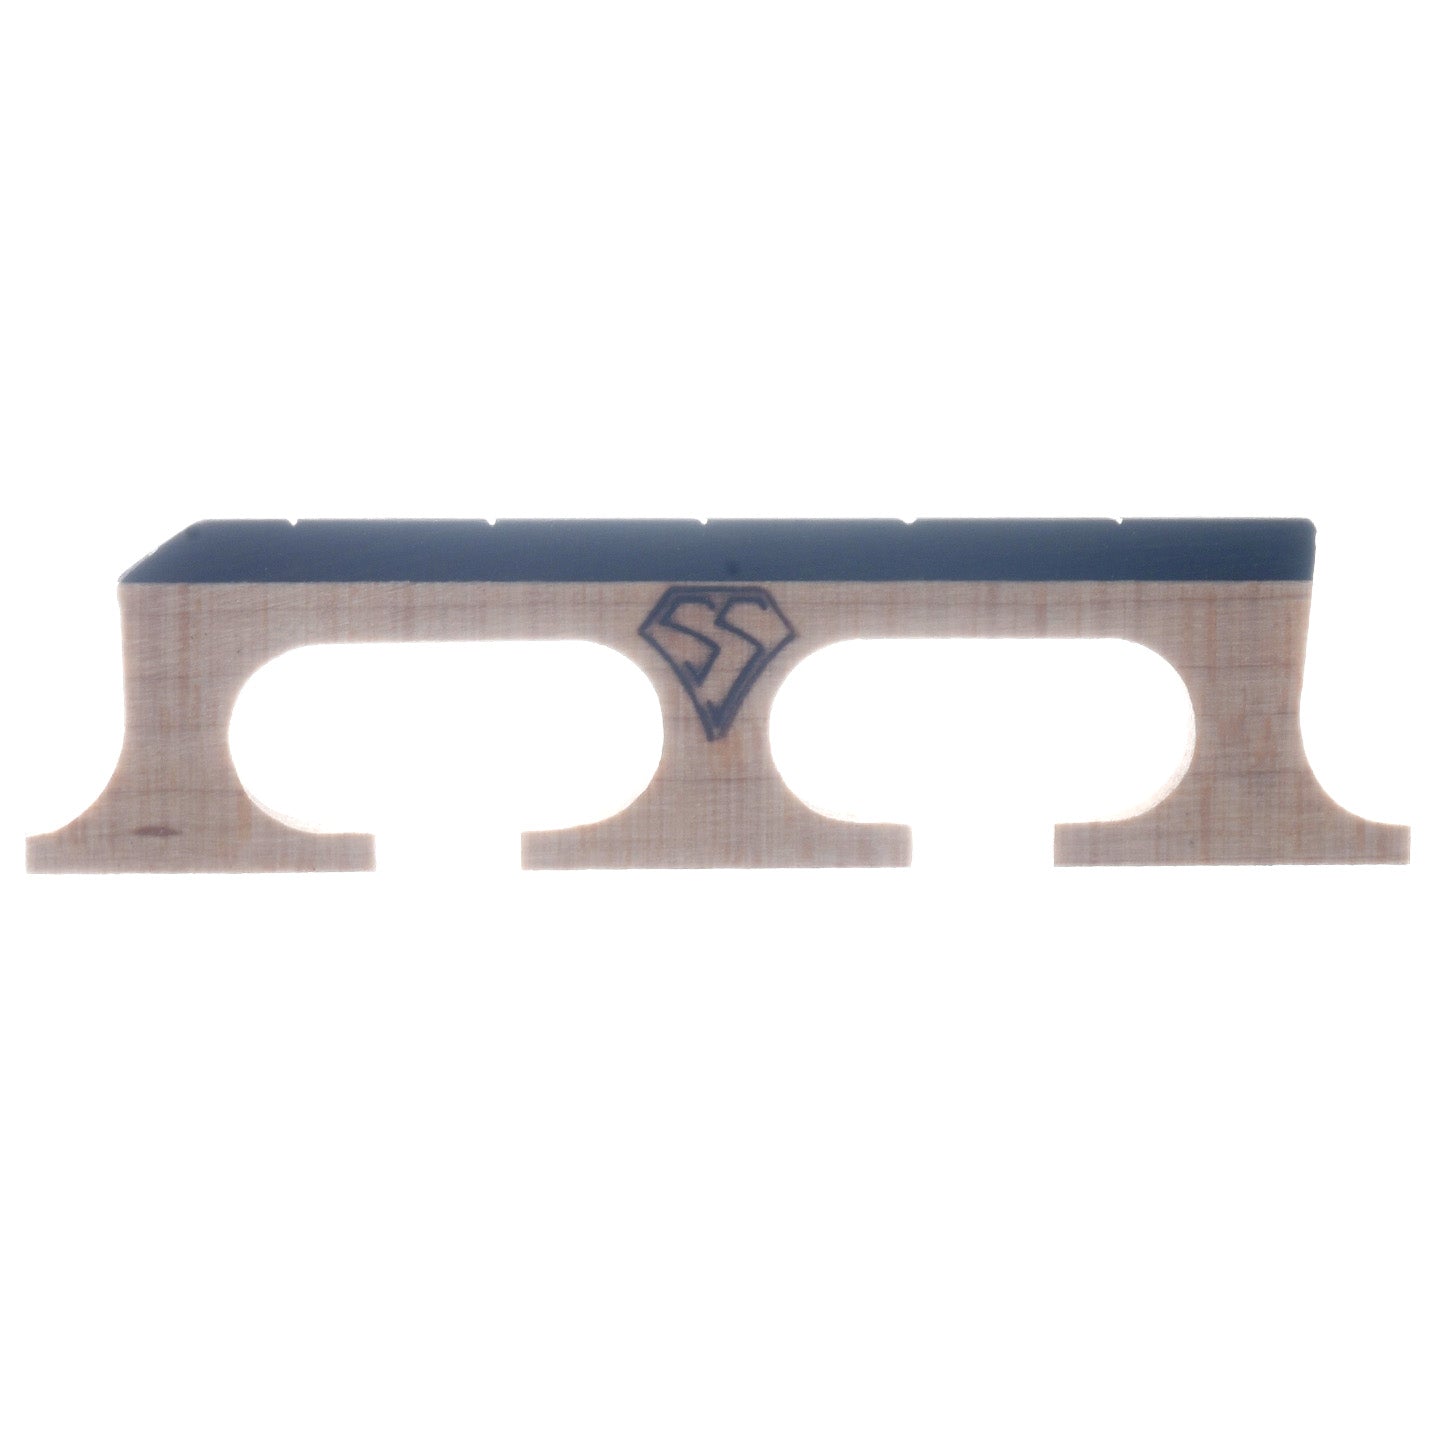 Image 2 of SNUFFY SMITH NEW GENERATION BANJO BRIDGE, 3/4" HIGH WITH CROWE SPACING - SKU# SSNG-3/4-C : Product Type Accessories & Parts : Elderly Instruments